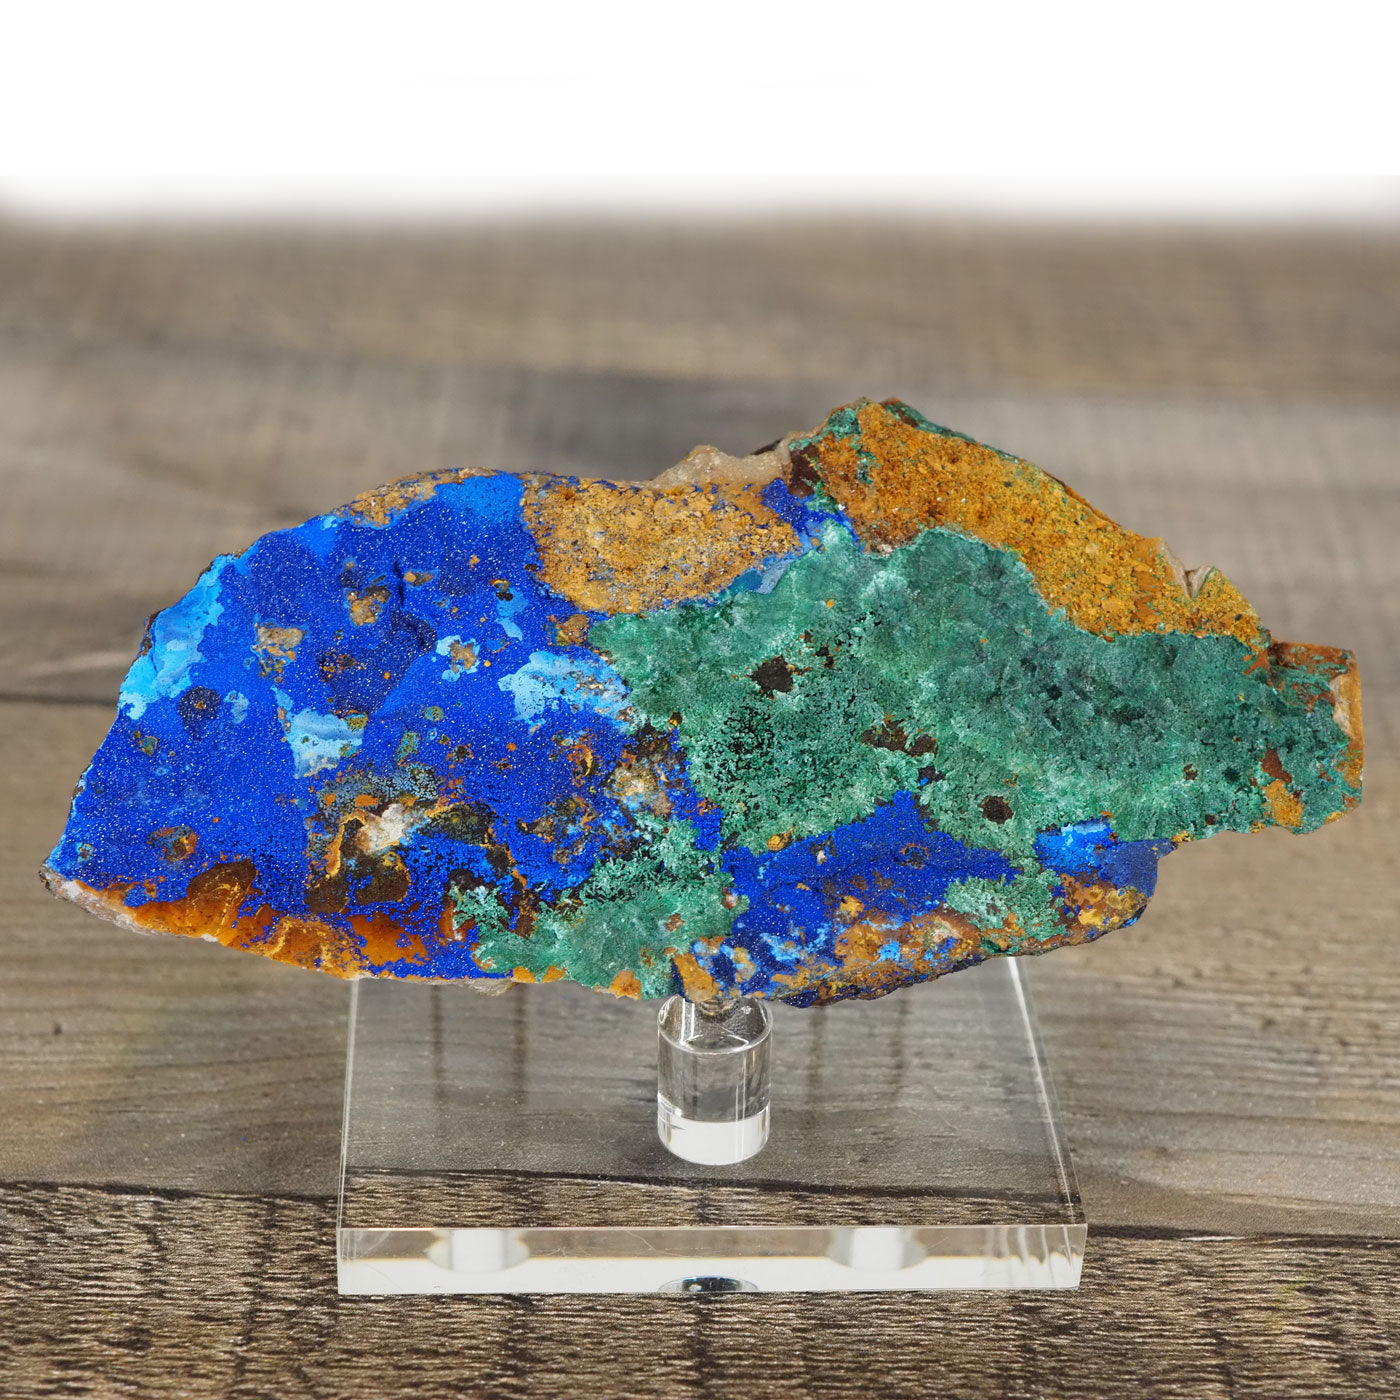 4.7" long Sparkly Azurite with Fibrous Malachite